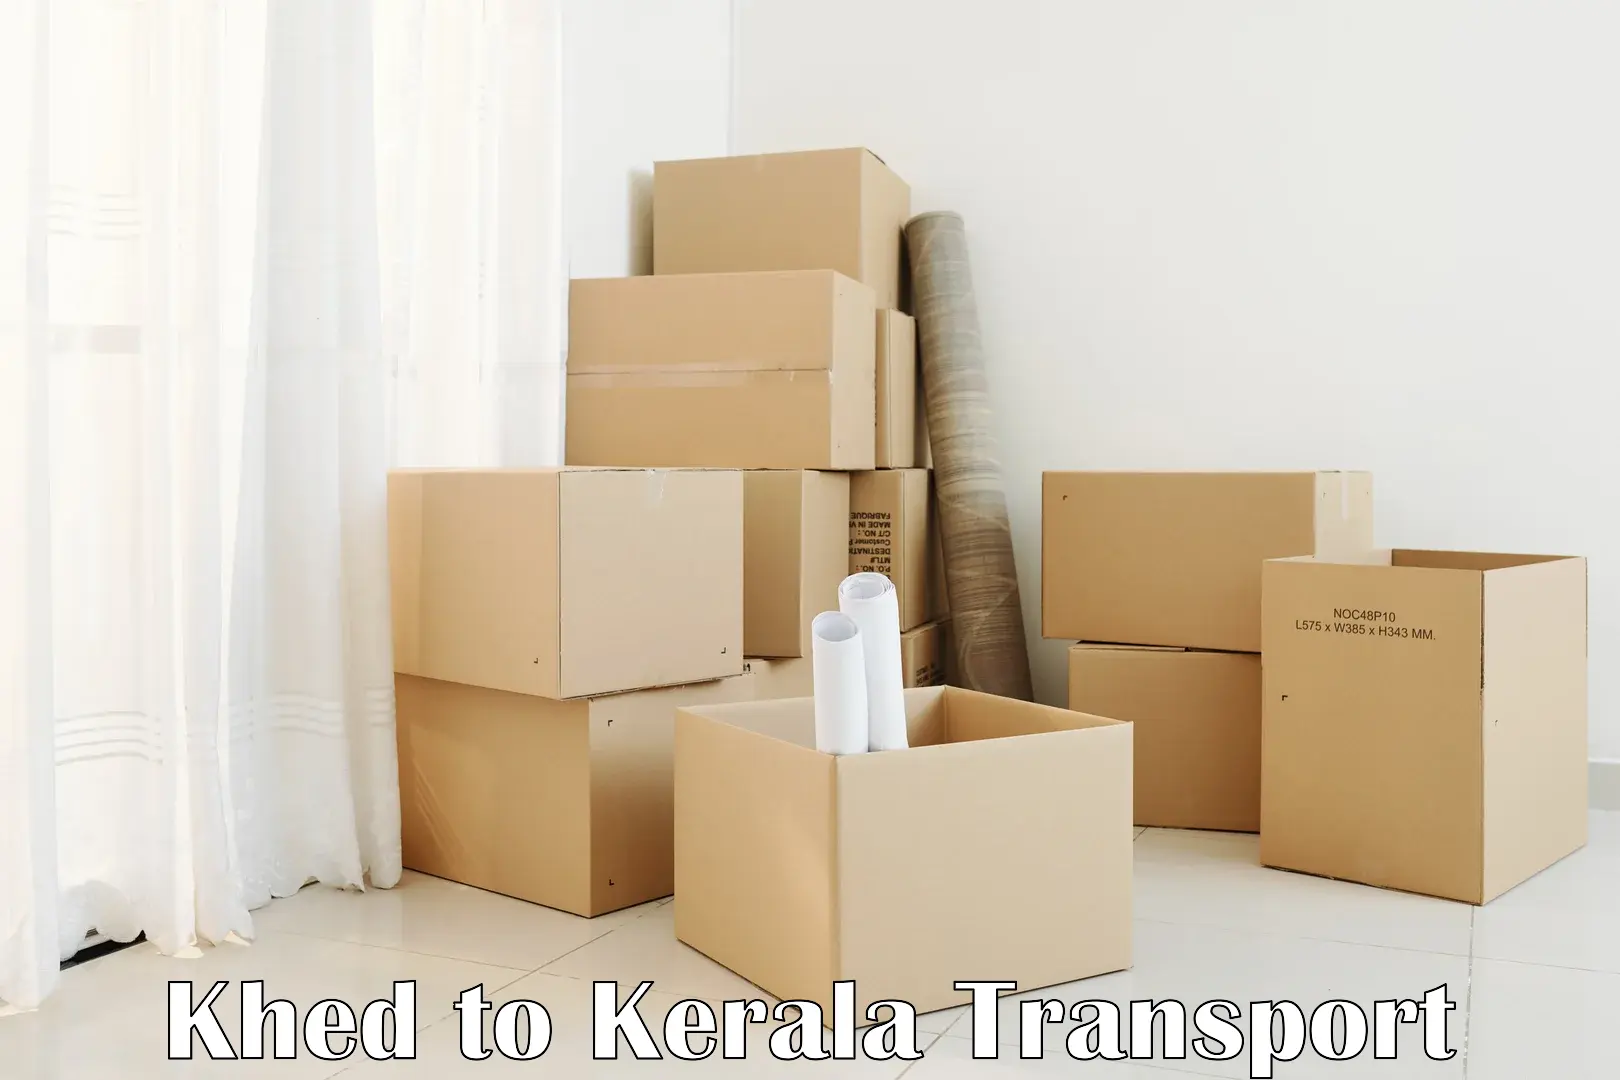 Container transport service Khed to Munnar